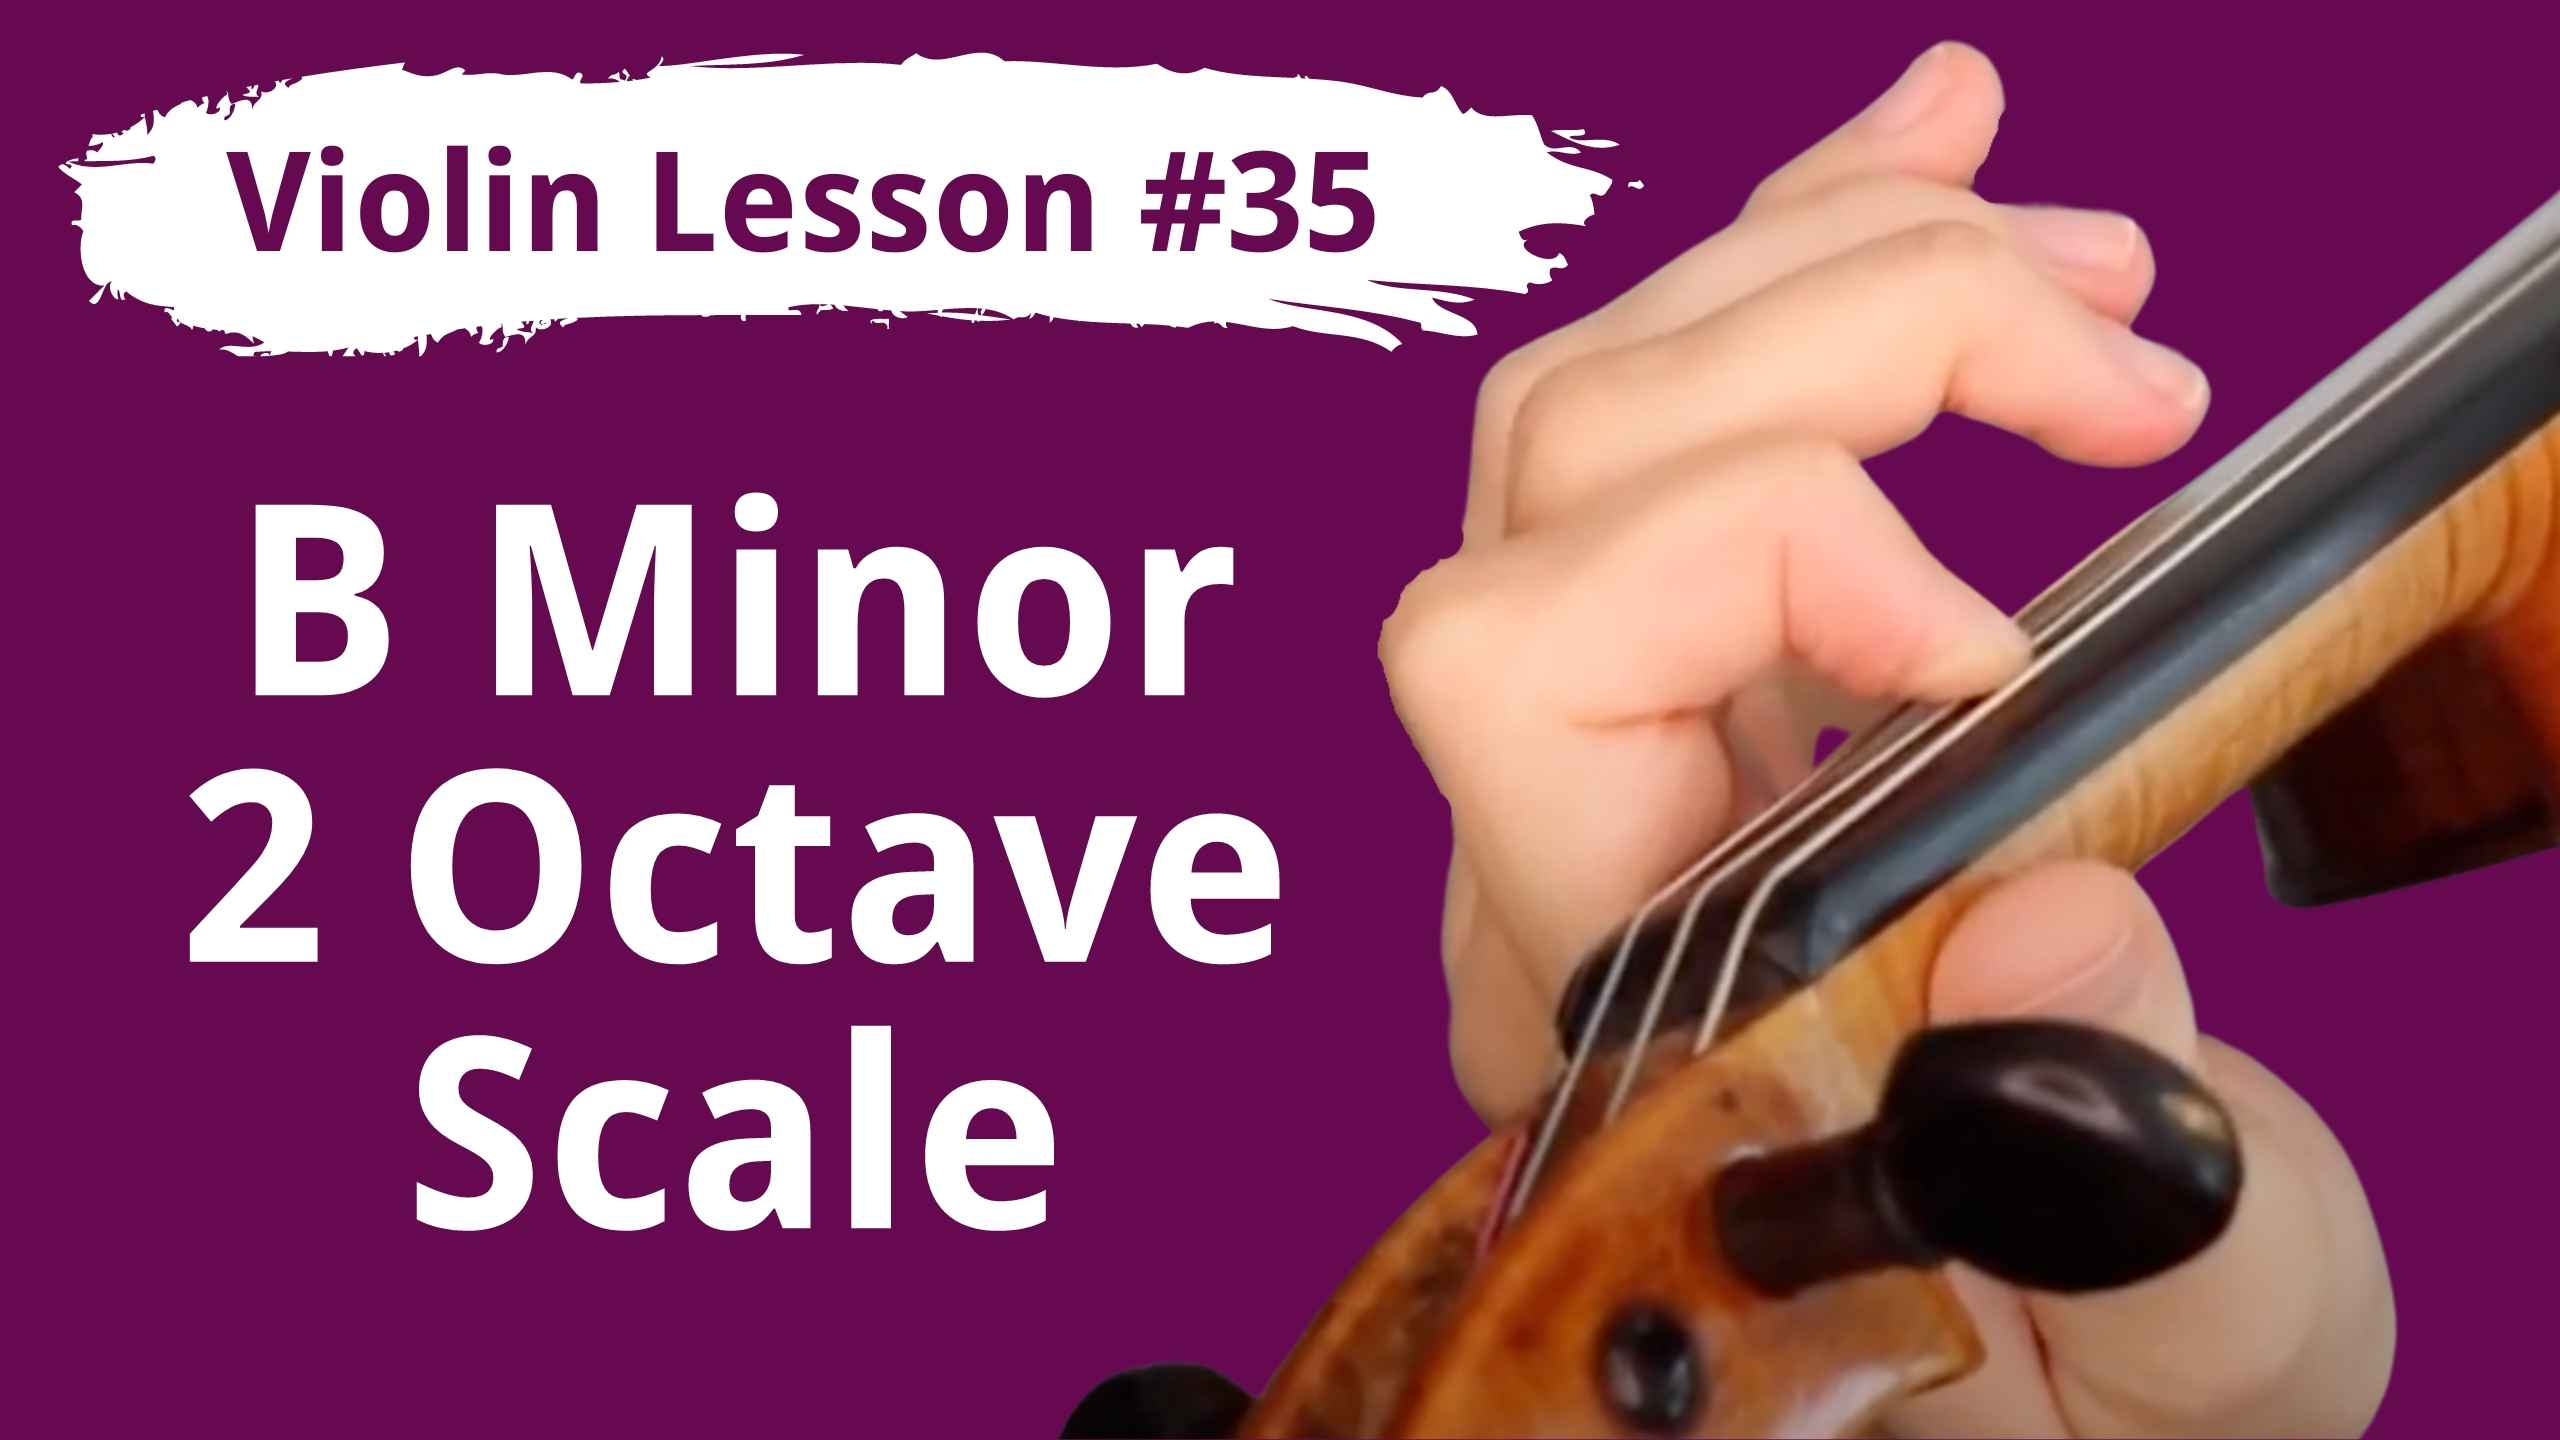 free-violin-lesson-35-first-minor-scale-b-minor-2-octaves-violin-lounge